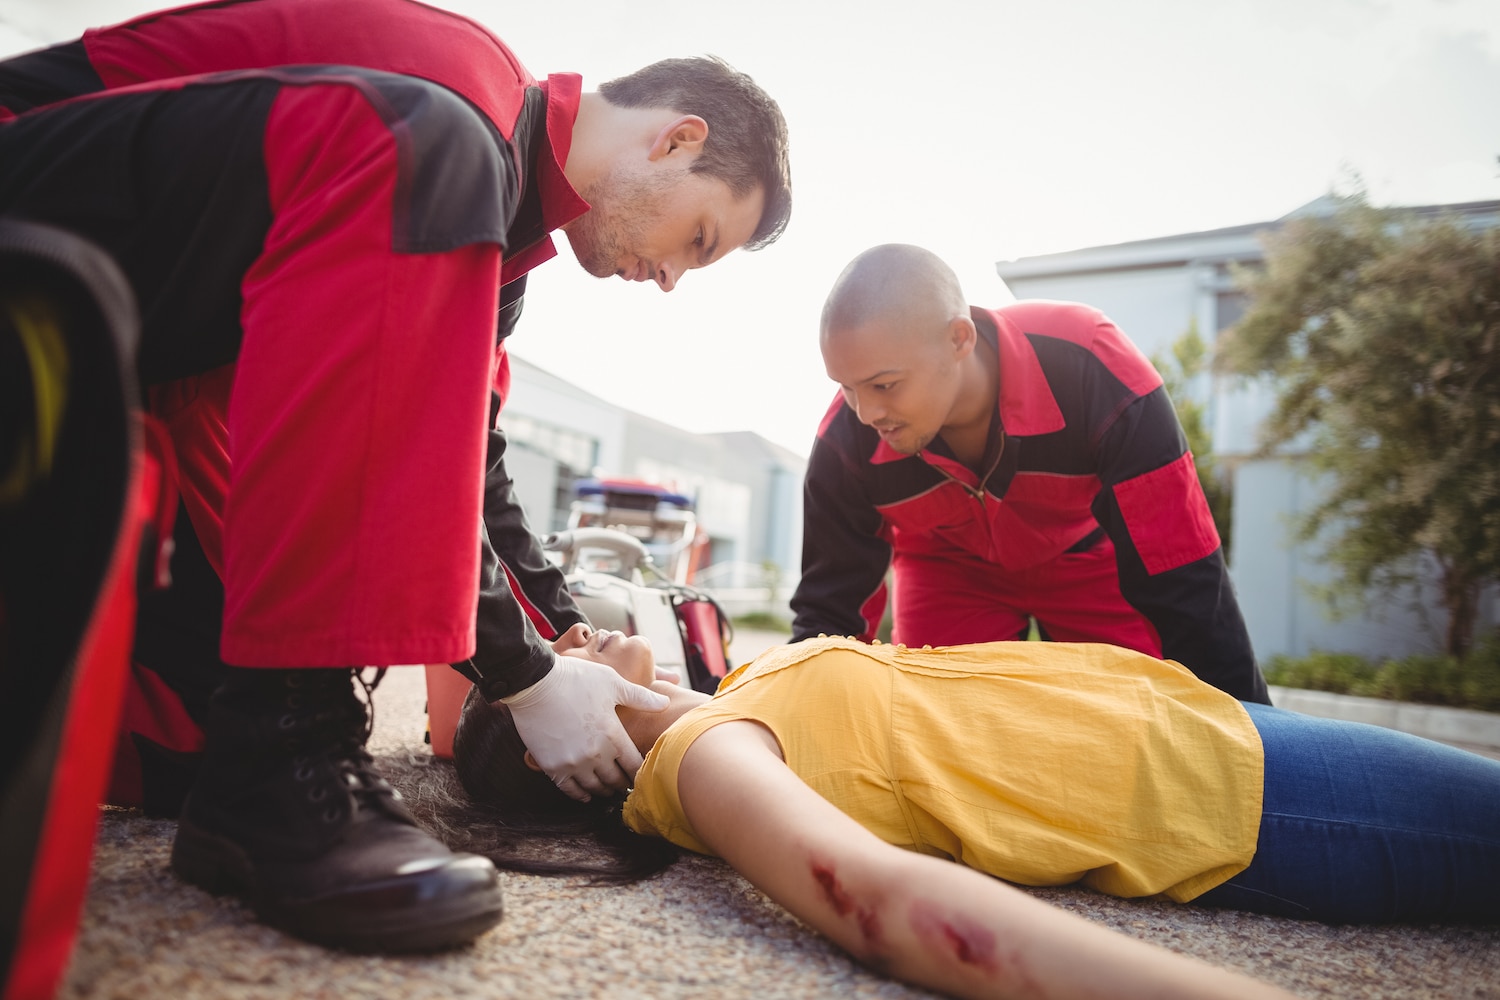 When the Unexpected Strikes: Examples of the Most Common Personal Injury Accidents